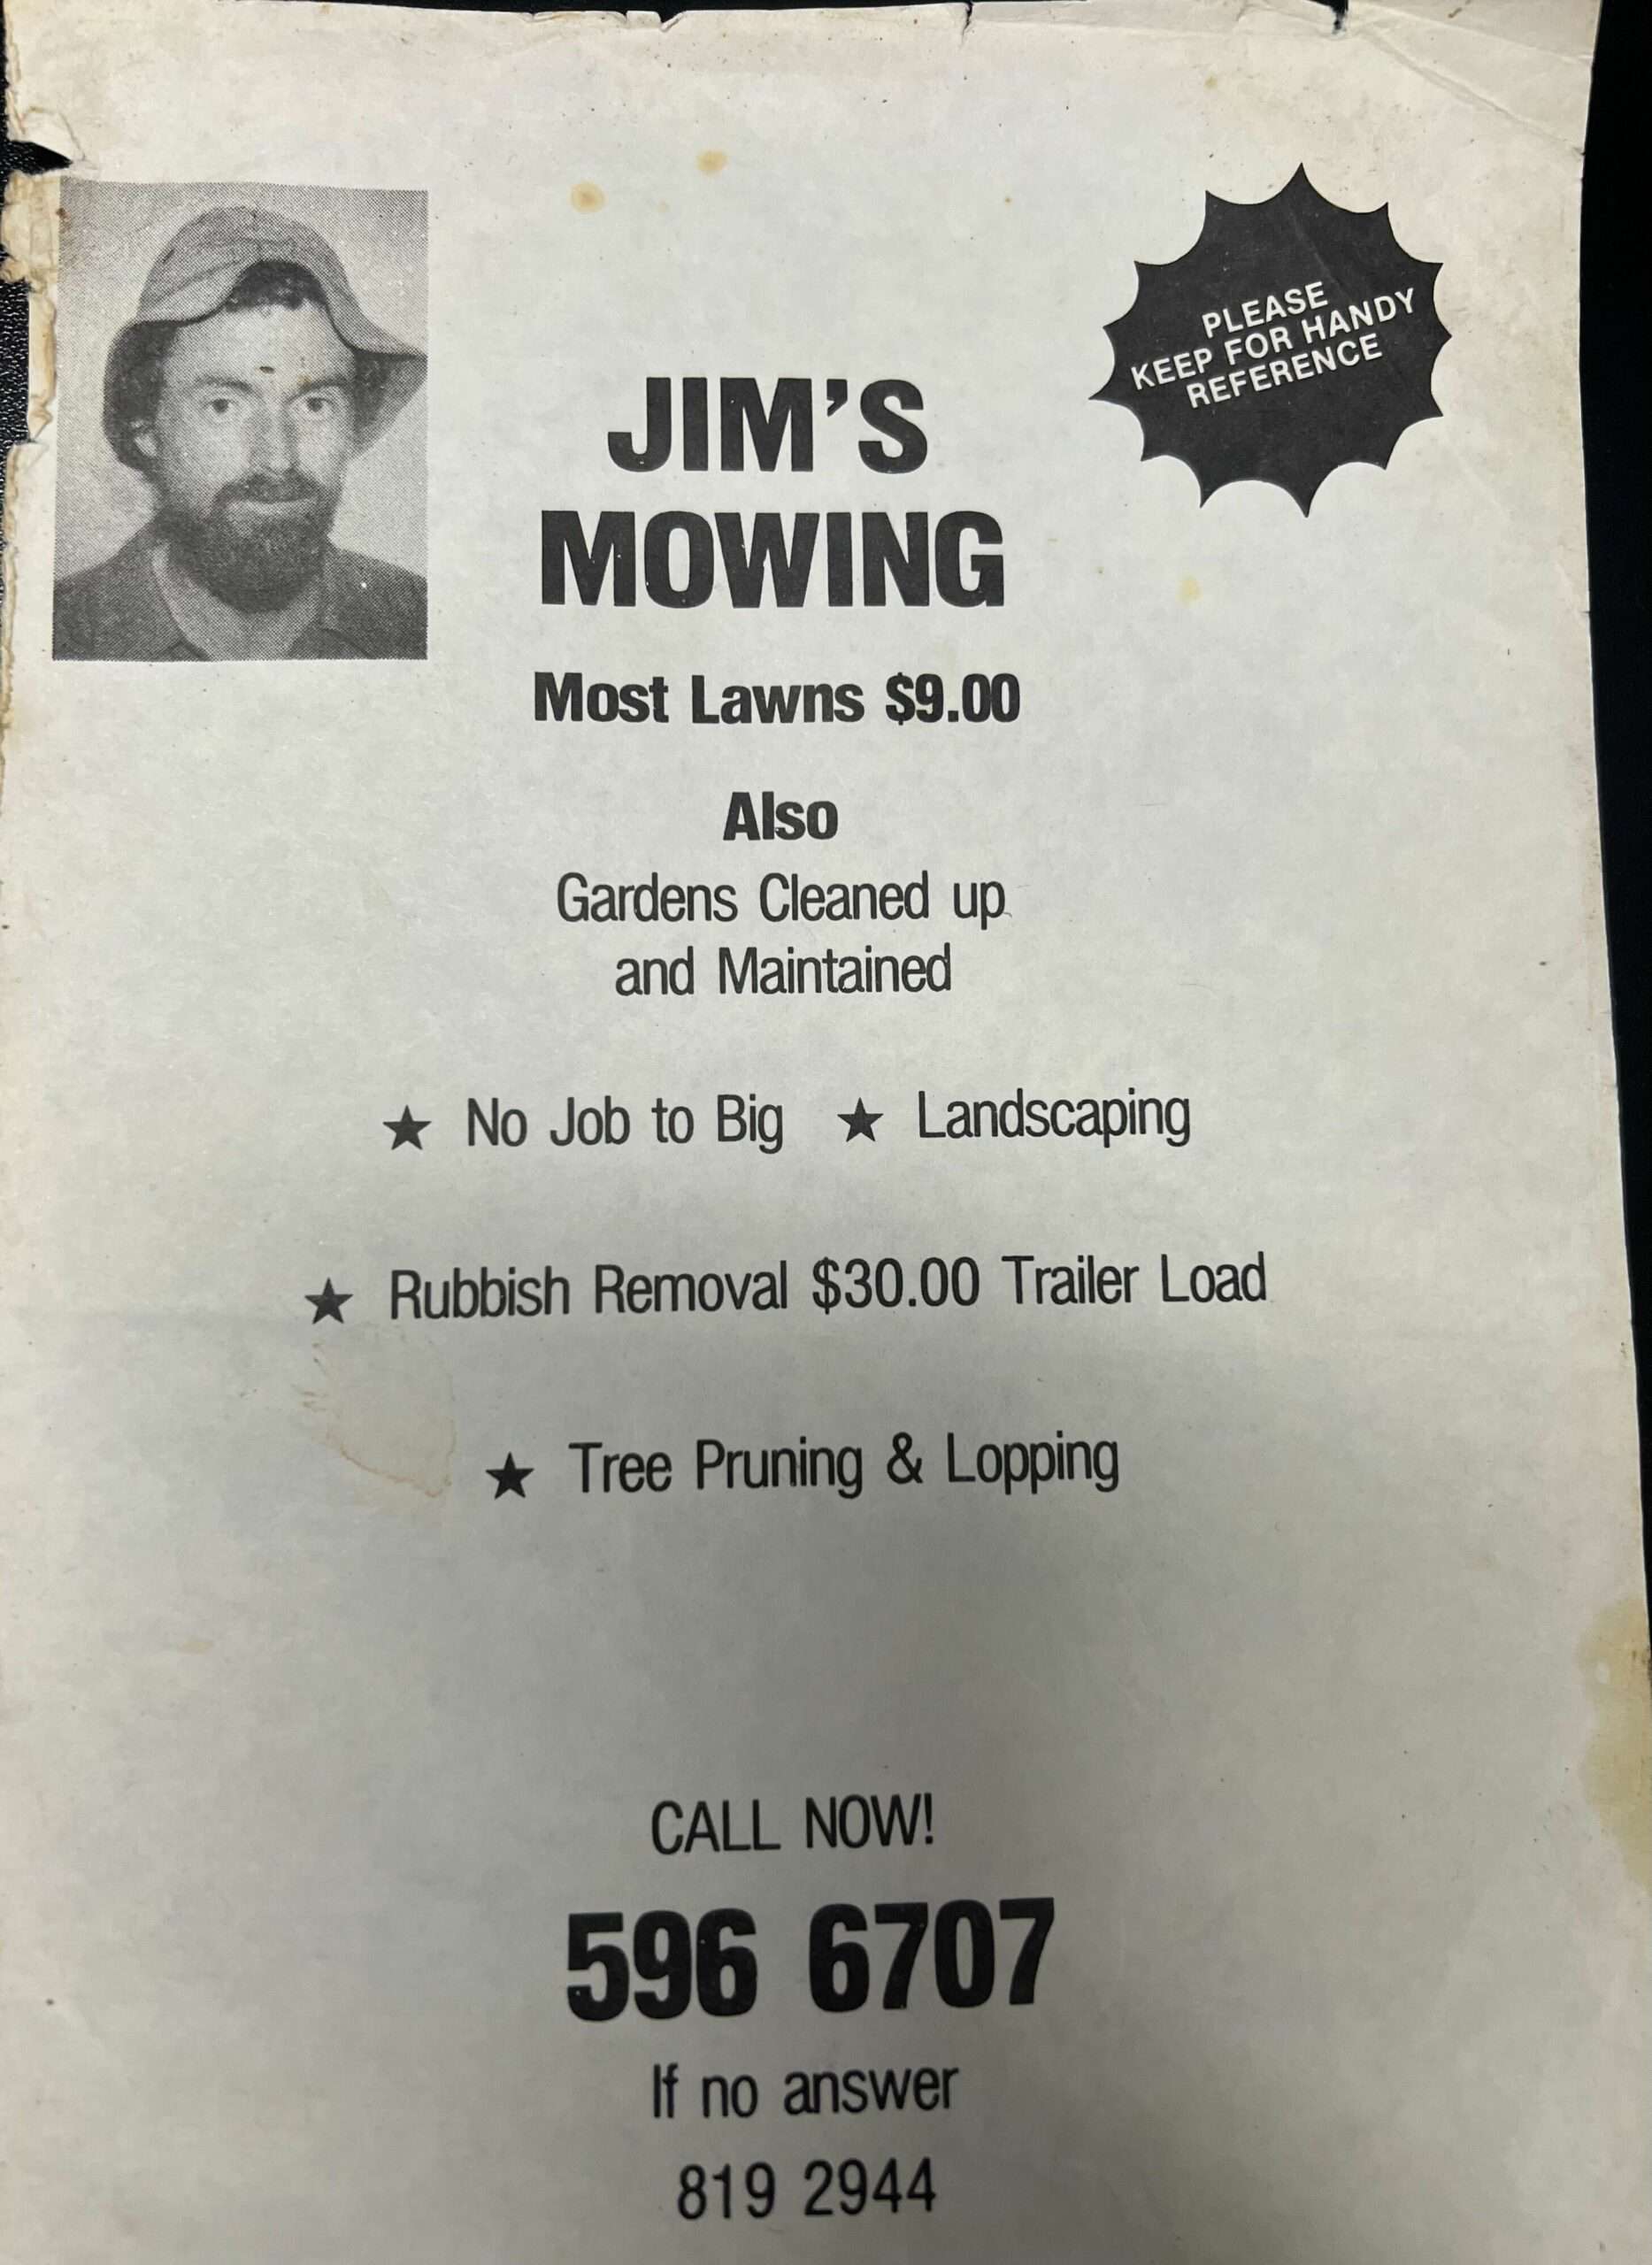 Jim's Mowing Founder, Jim Penman's very first flyer